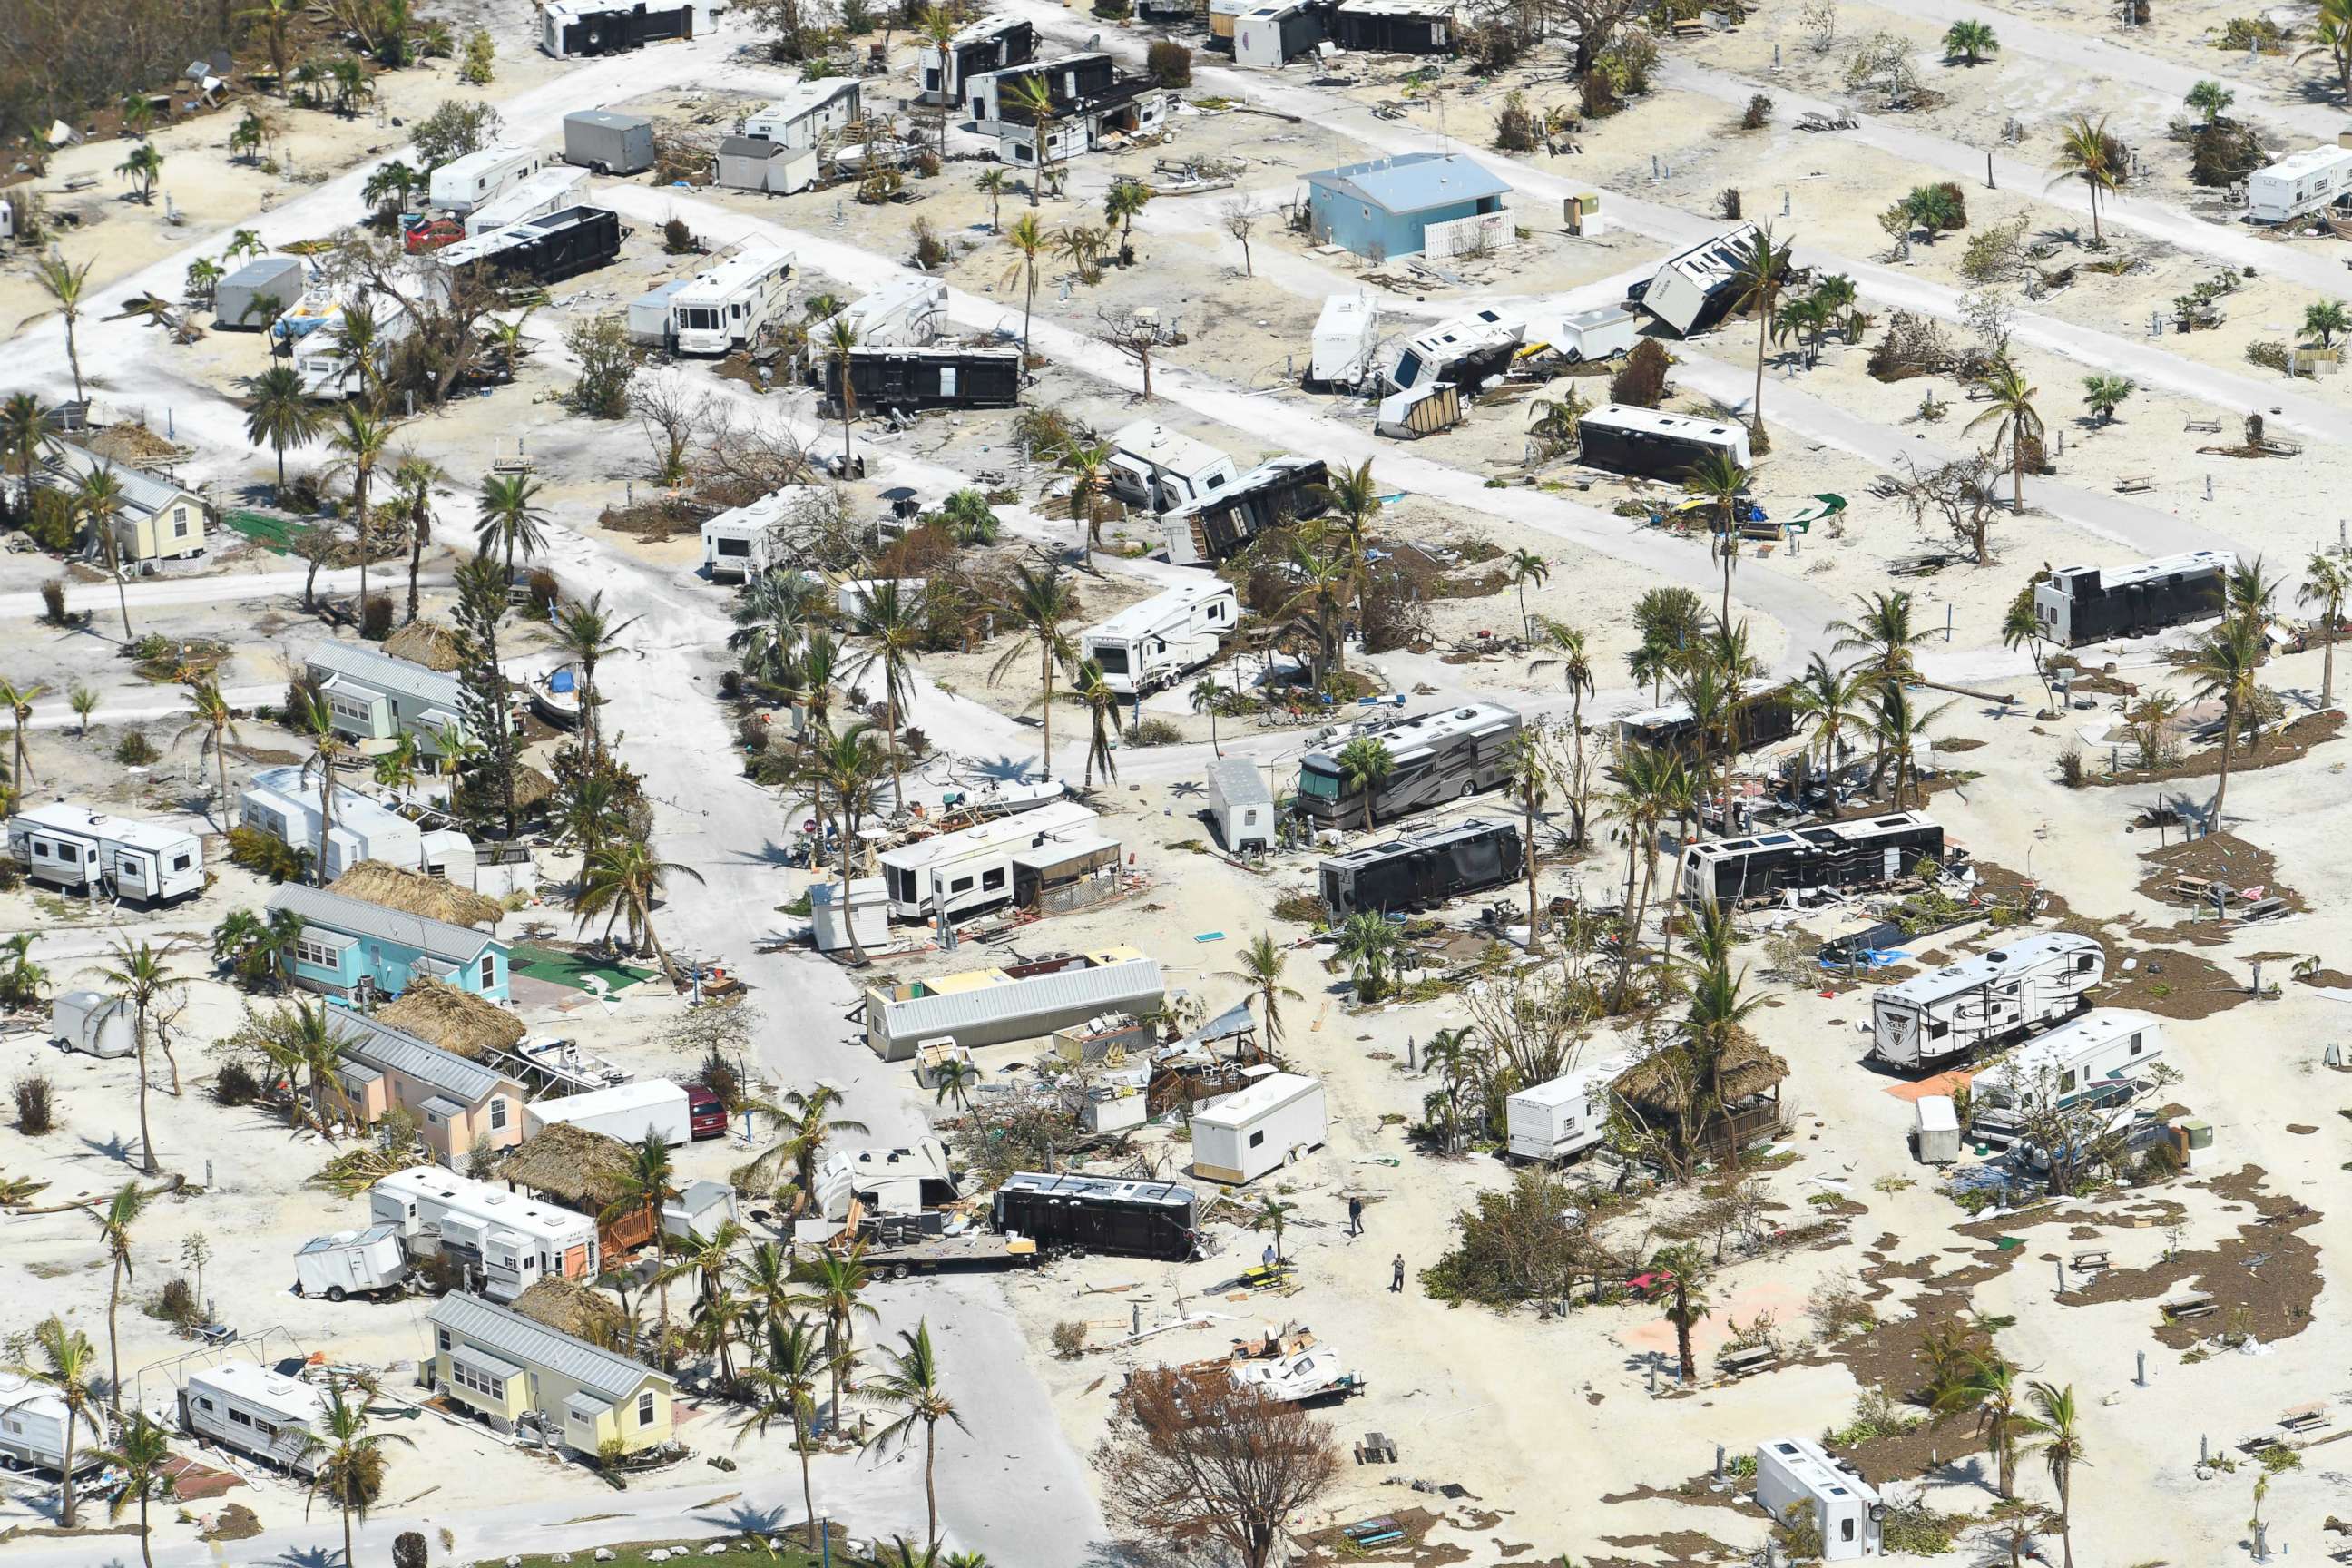 PHOTO: Damage to a mobile home community can be seen in the Lower Florida Keys after Hurricane Irma struck the state, Sept. 12, 2017.